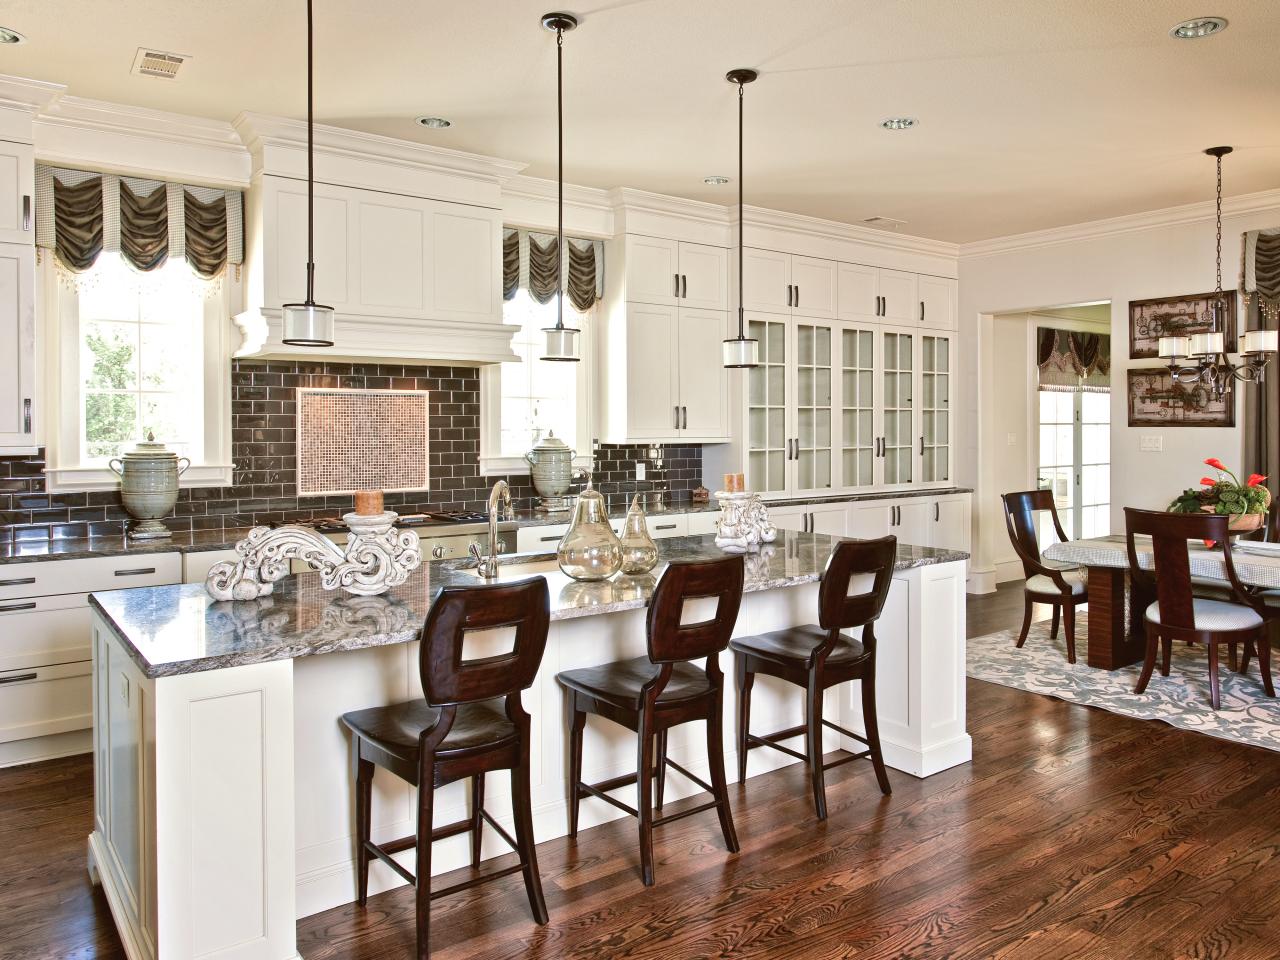 What Kind of Bar Stools are Best for the Kitchen